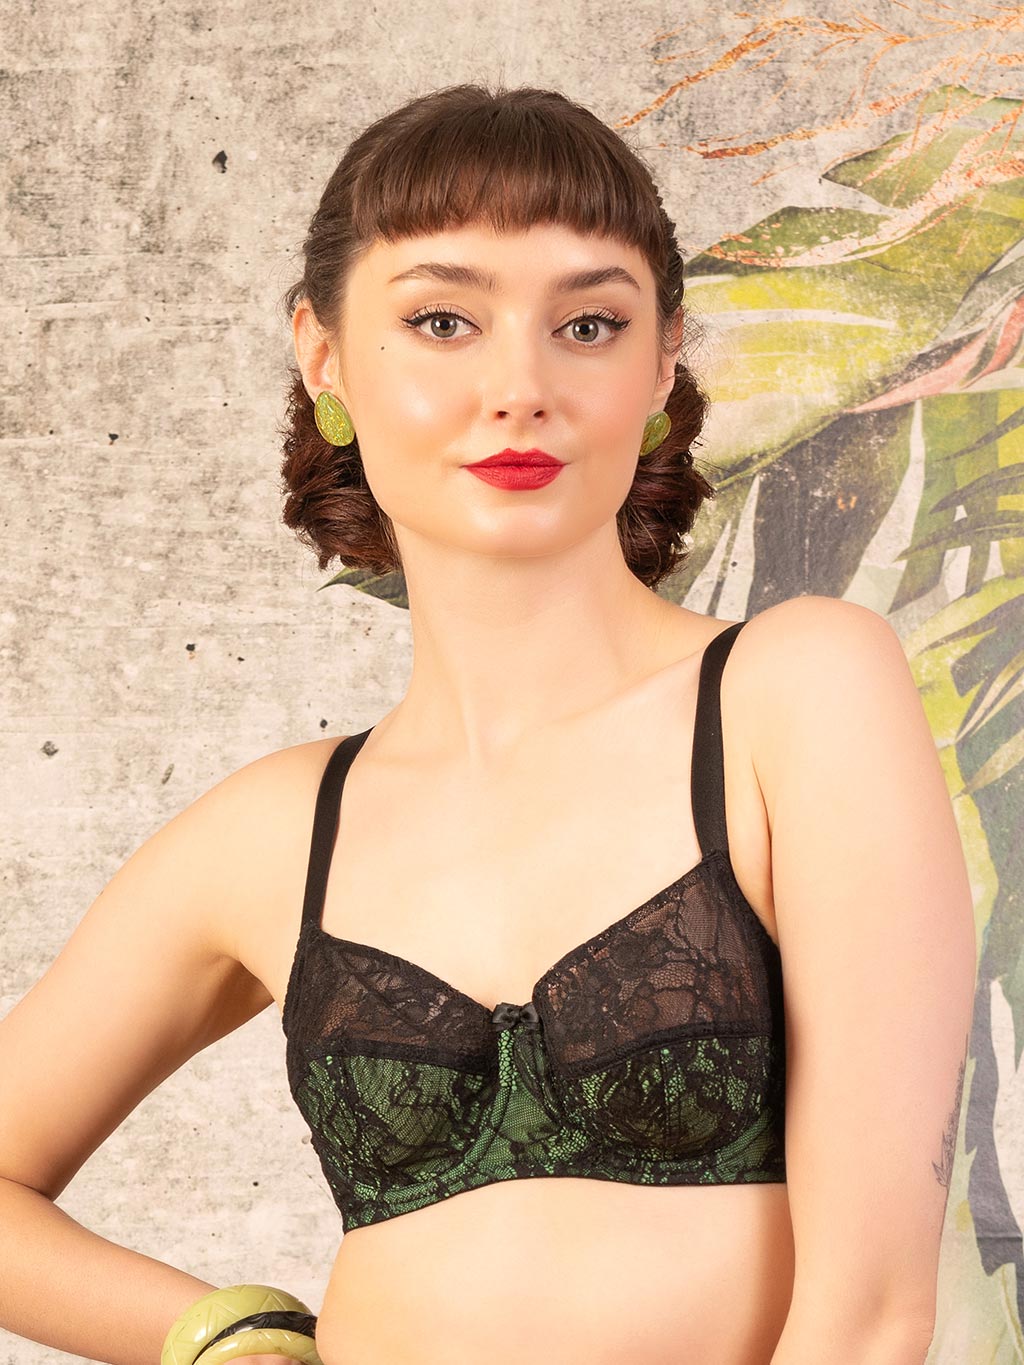 Green Vintage Bra Hand-dyed Forest Green Bra Tagged 36C 60s 70s Vintage Bra  Pinup Festival Wear Upcycled 